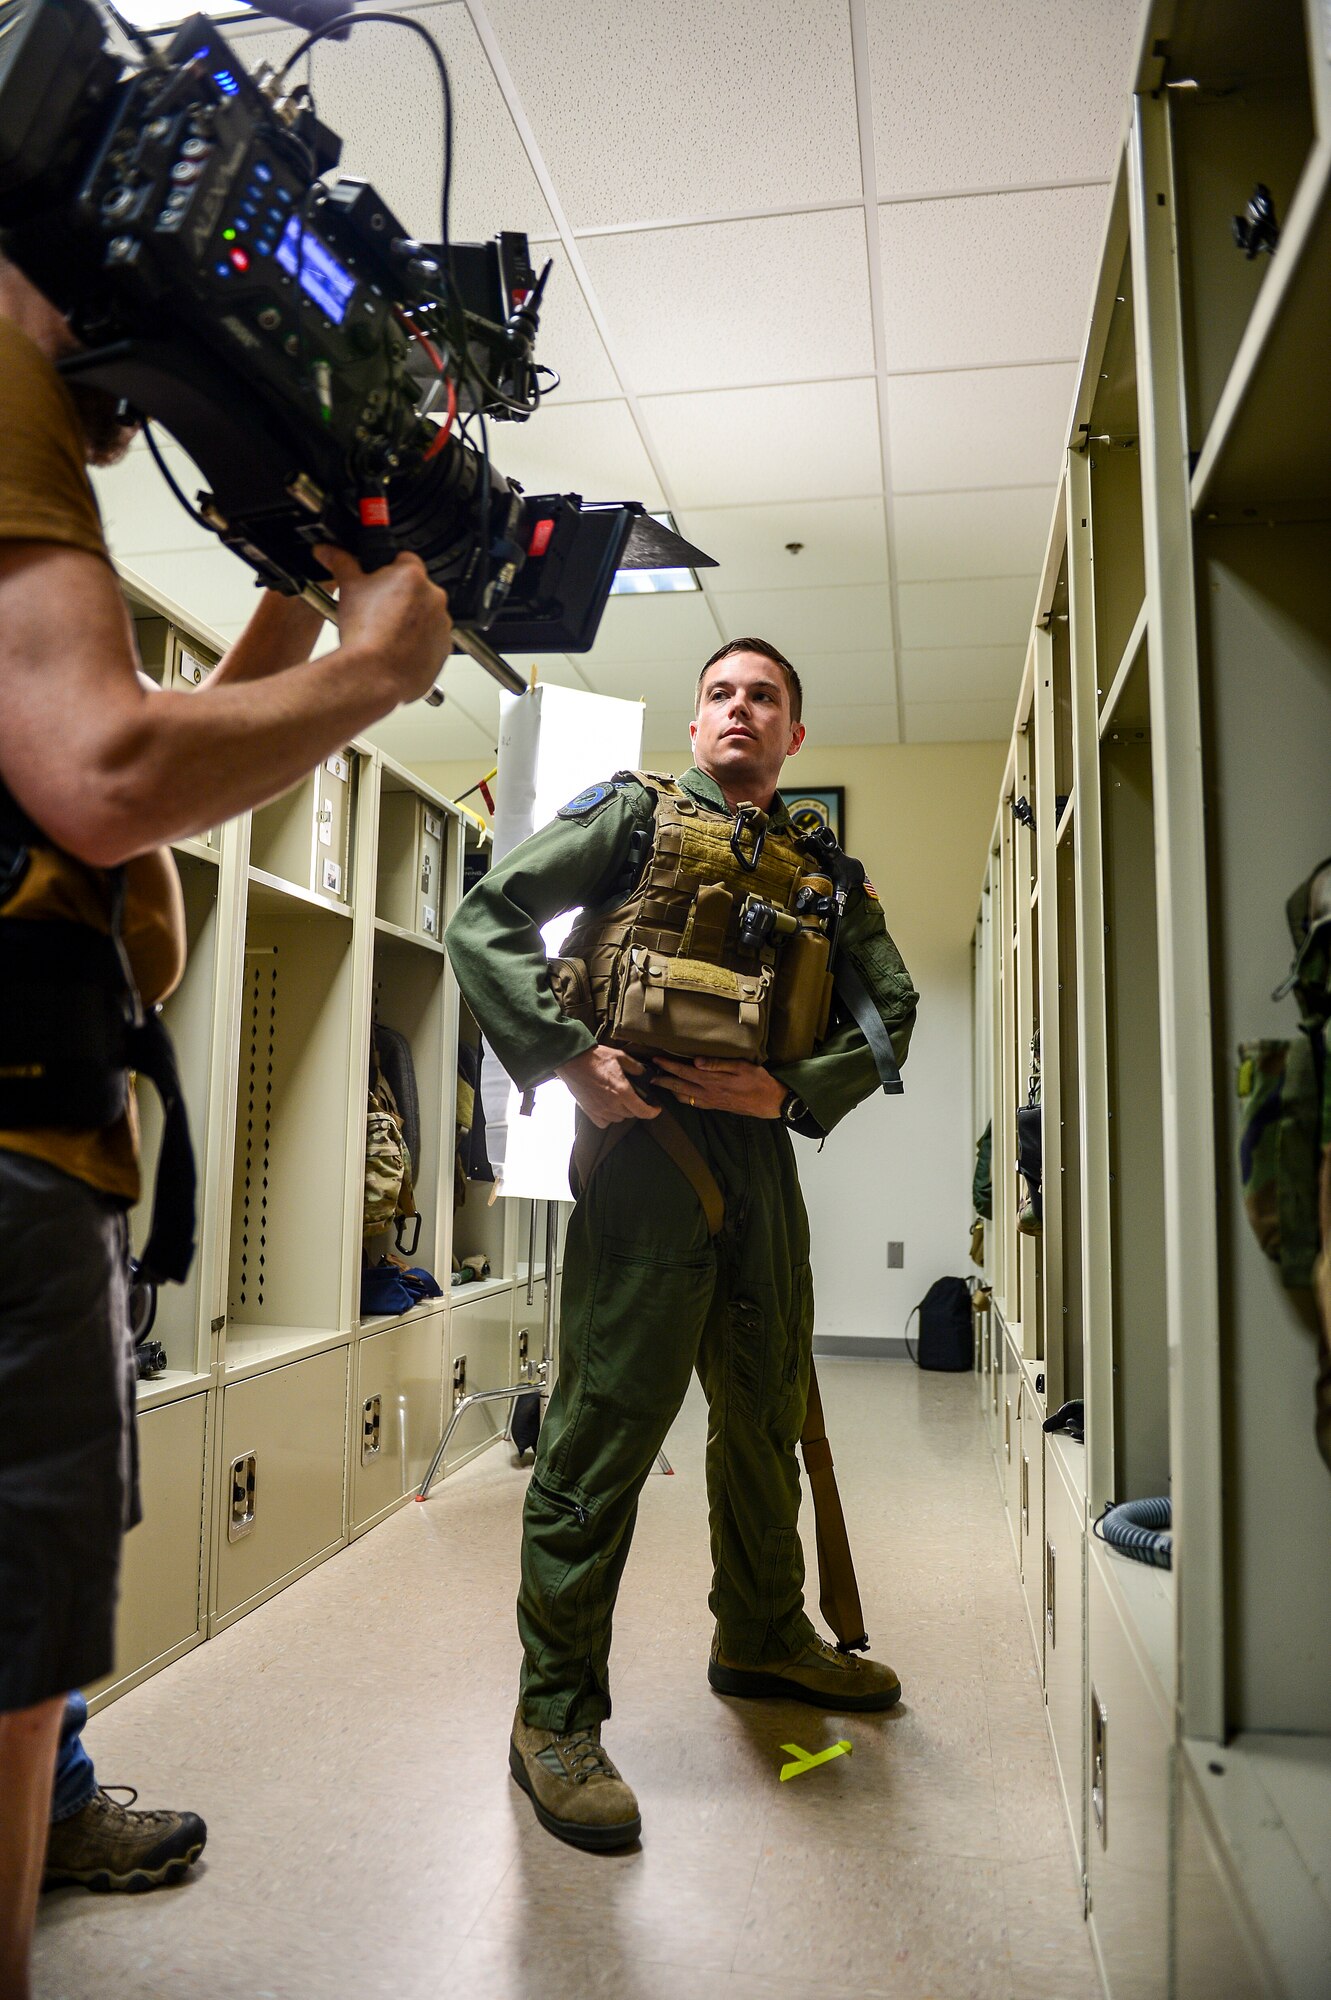 Capt. Chris Nehls, 8th Special Operations Squadron CV-22 pilot, dons his gear during the filming of an Air Force Recruiting commercial at Hurlburt Field, Fla., July 9, 2014. GSD&M Advertising is a company based out of Austin, TX contracted by the Air Force Recruiting Service. (U.S. Air Force photo/Airman 1st Class Jeff Parkinson)